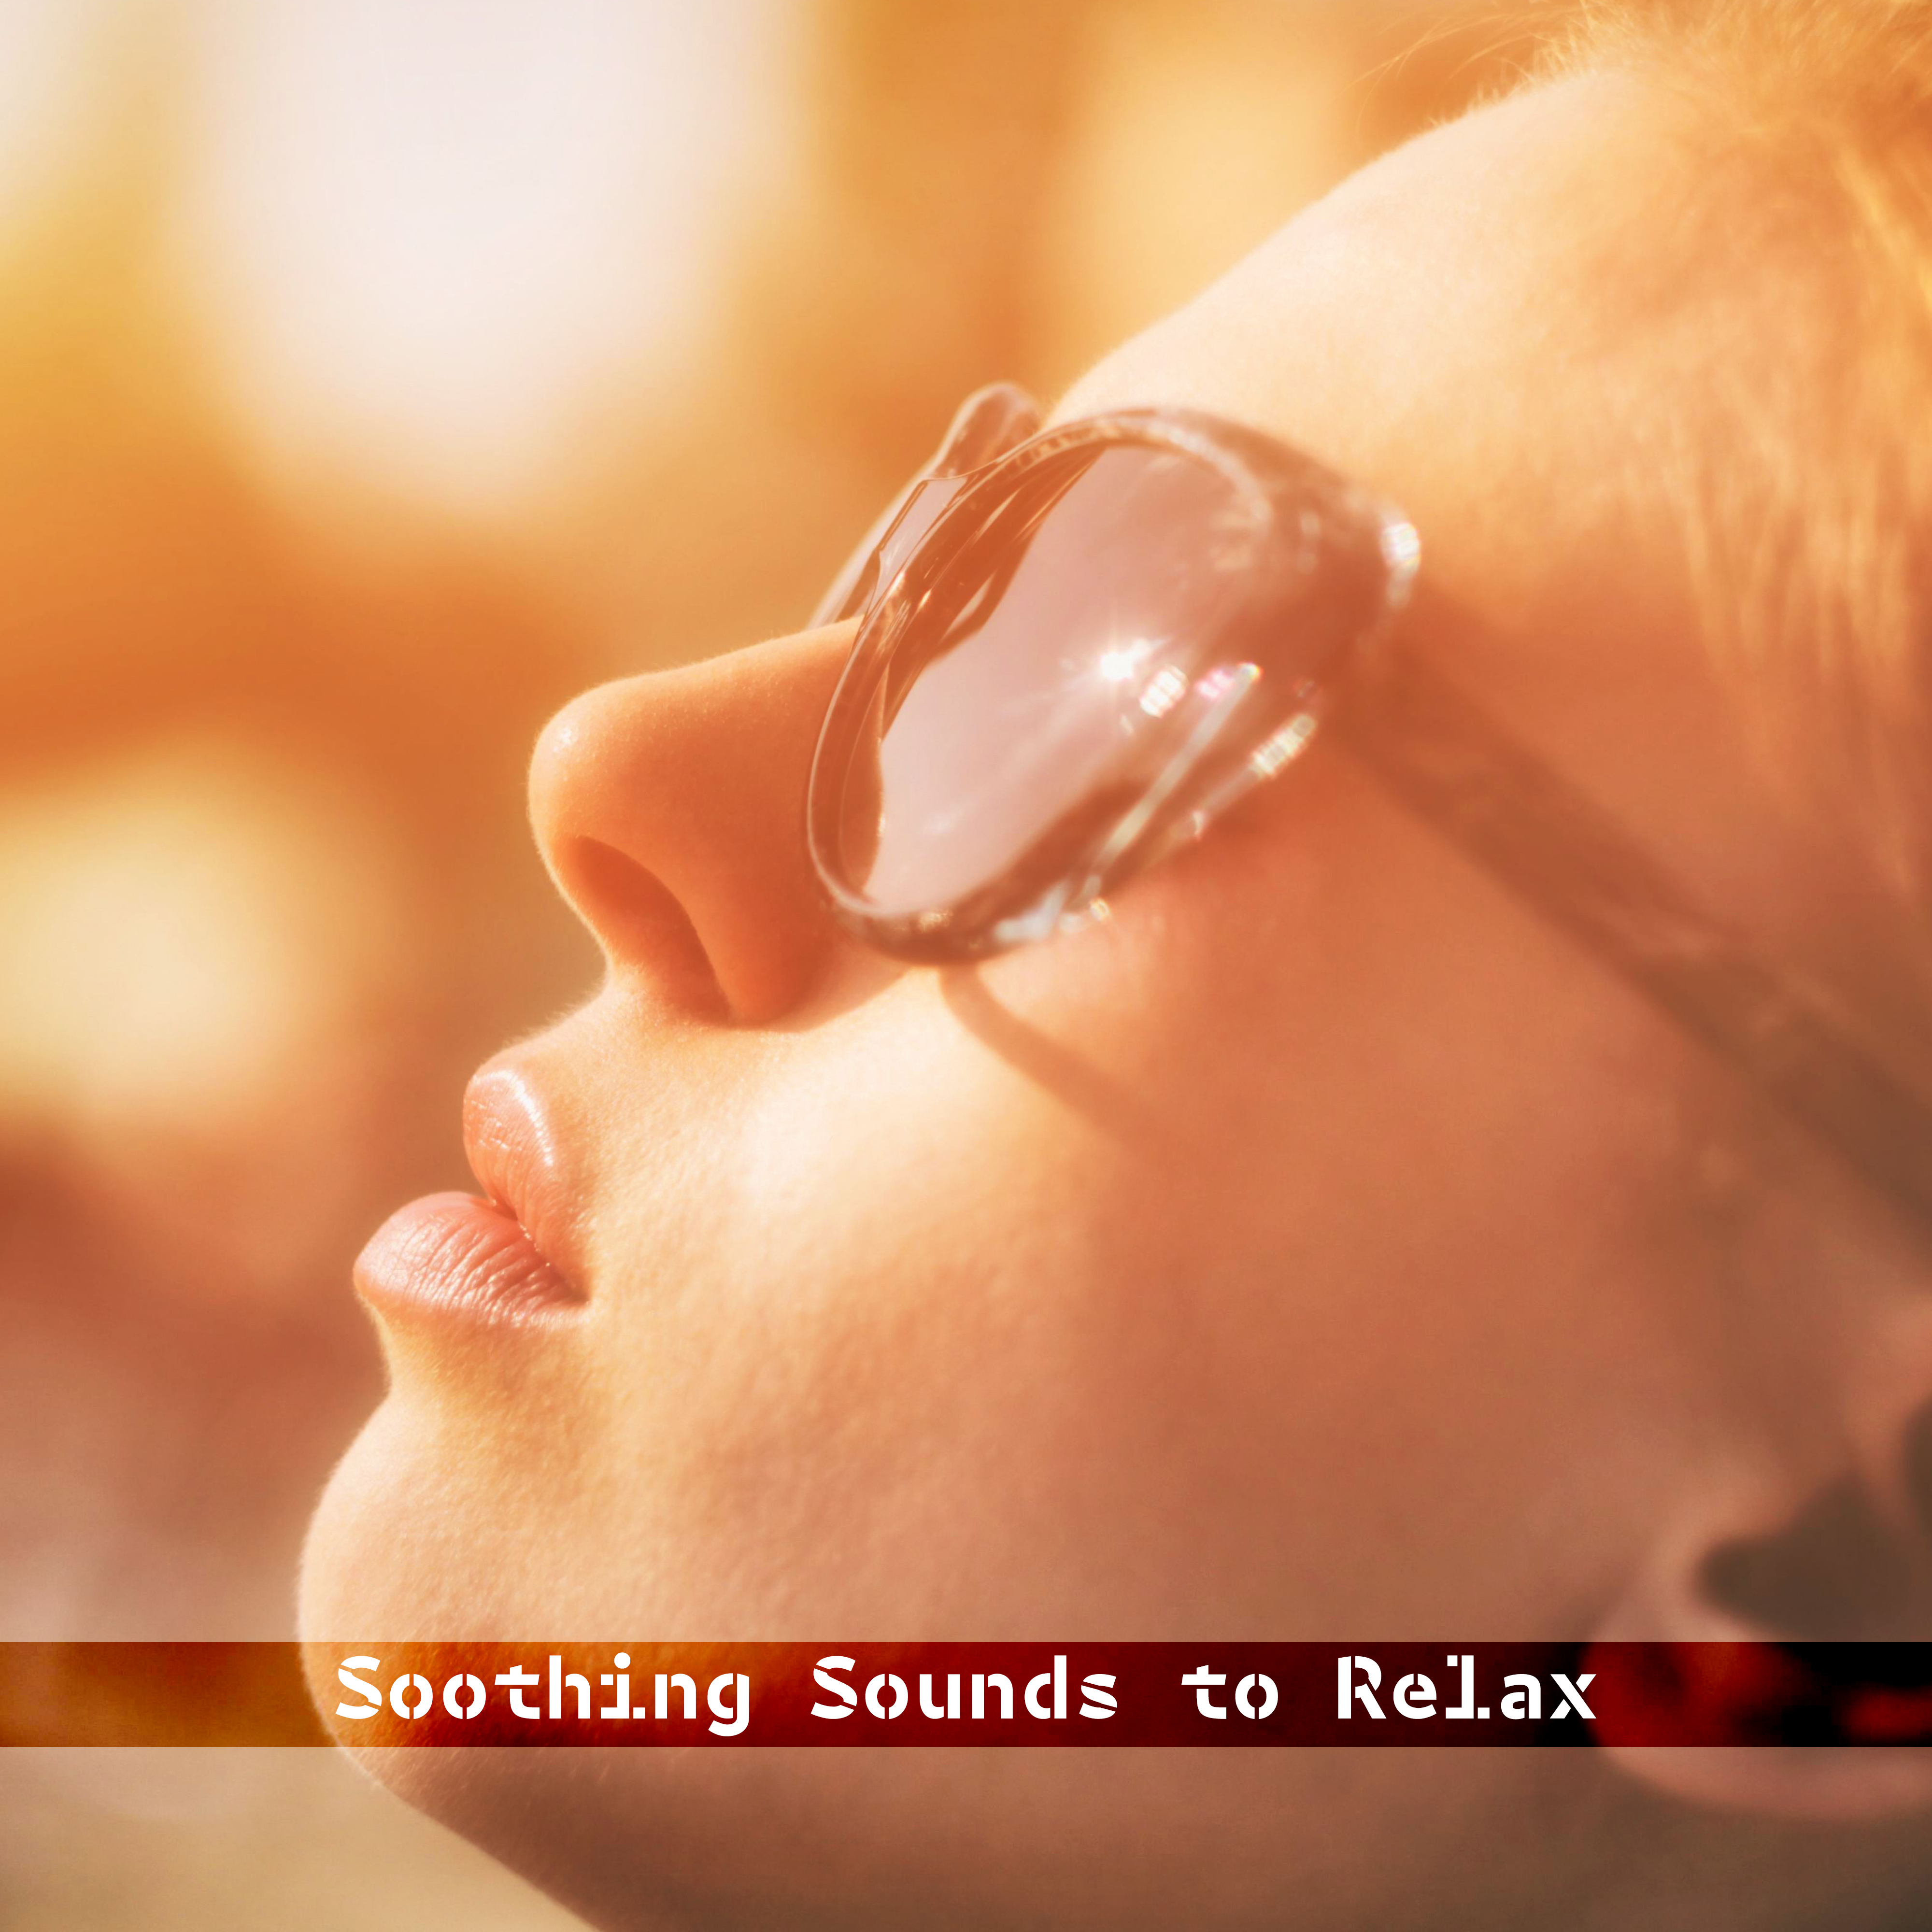 Soothing Sounds to Relax – New Age Relaxing Sounds, Time to Rest, Soft Music, Peaceful Sounds for Mind Calmness